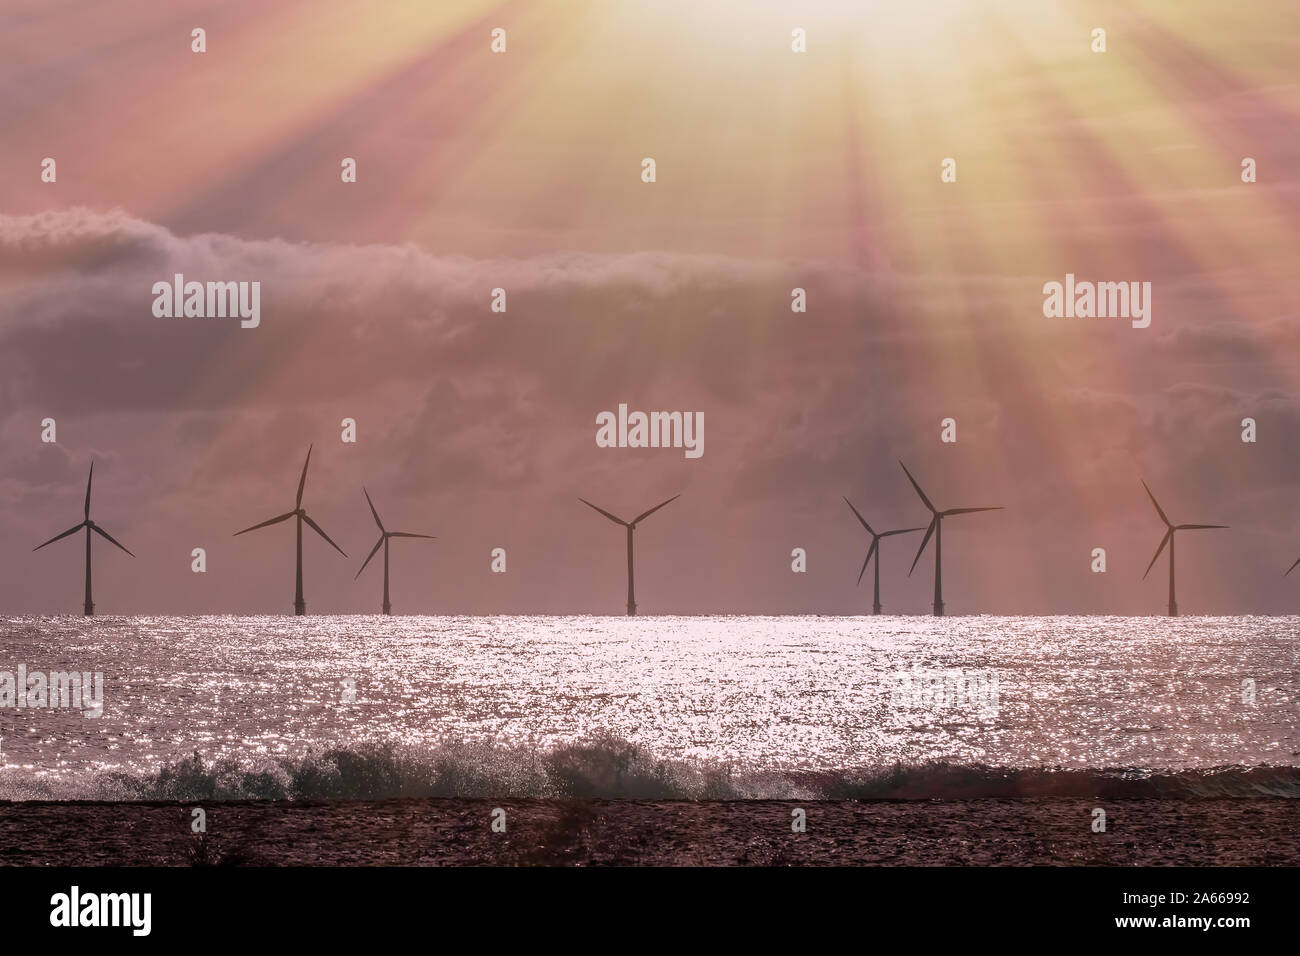 Solar wind and wave power. Beautiful alternative energy landscape scene. Sustainable resources calm and spiritual background image with offshore windf Stock Photo